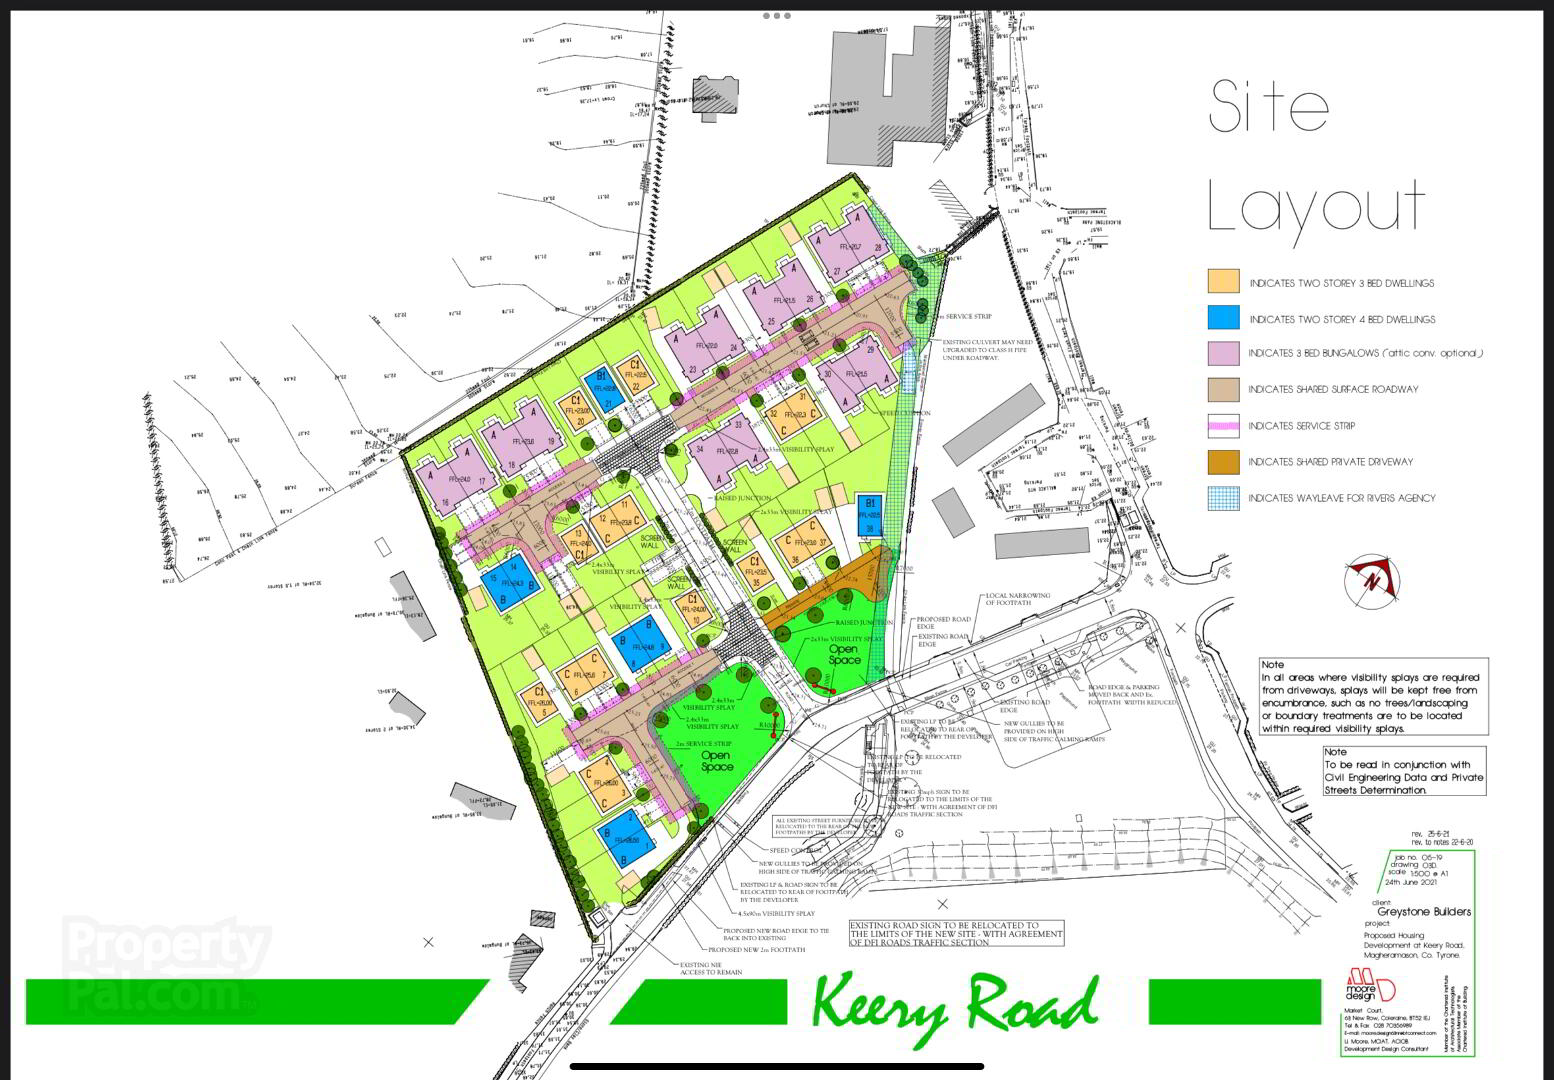 Development Land With Full Planning Permission, Keery Road